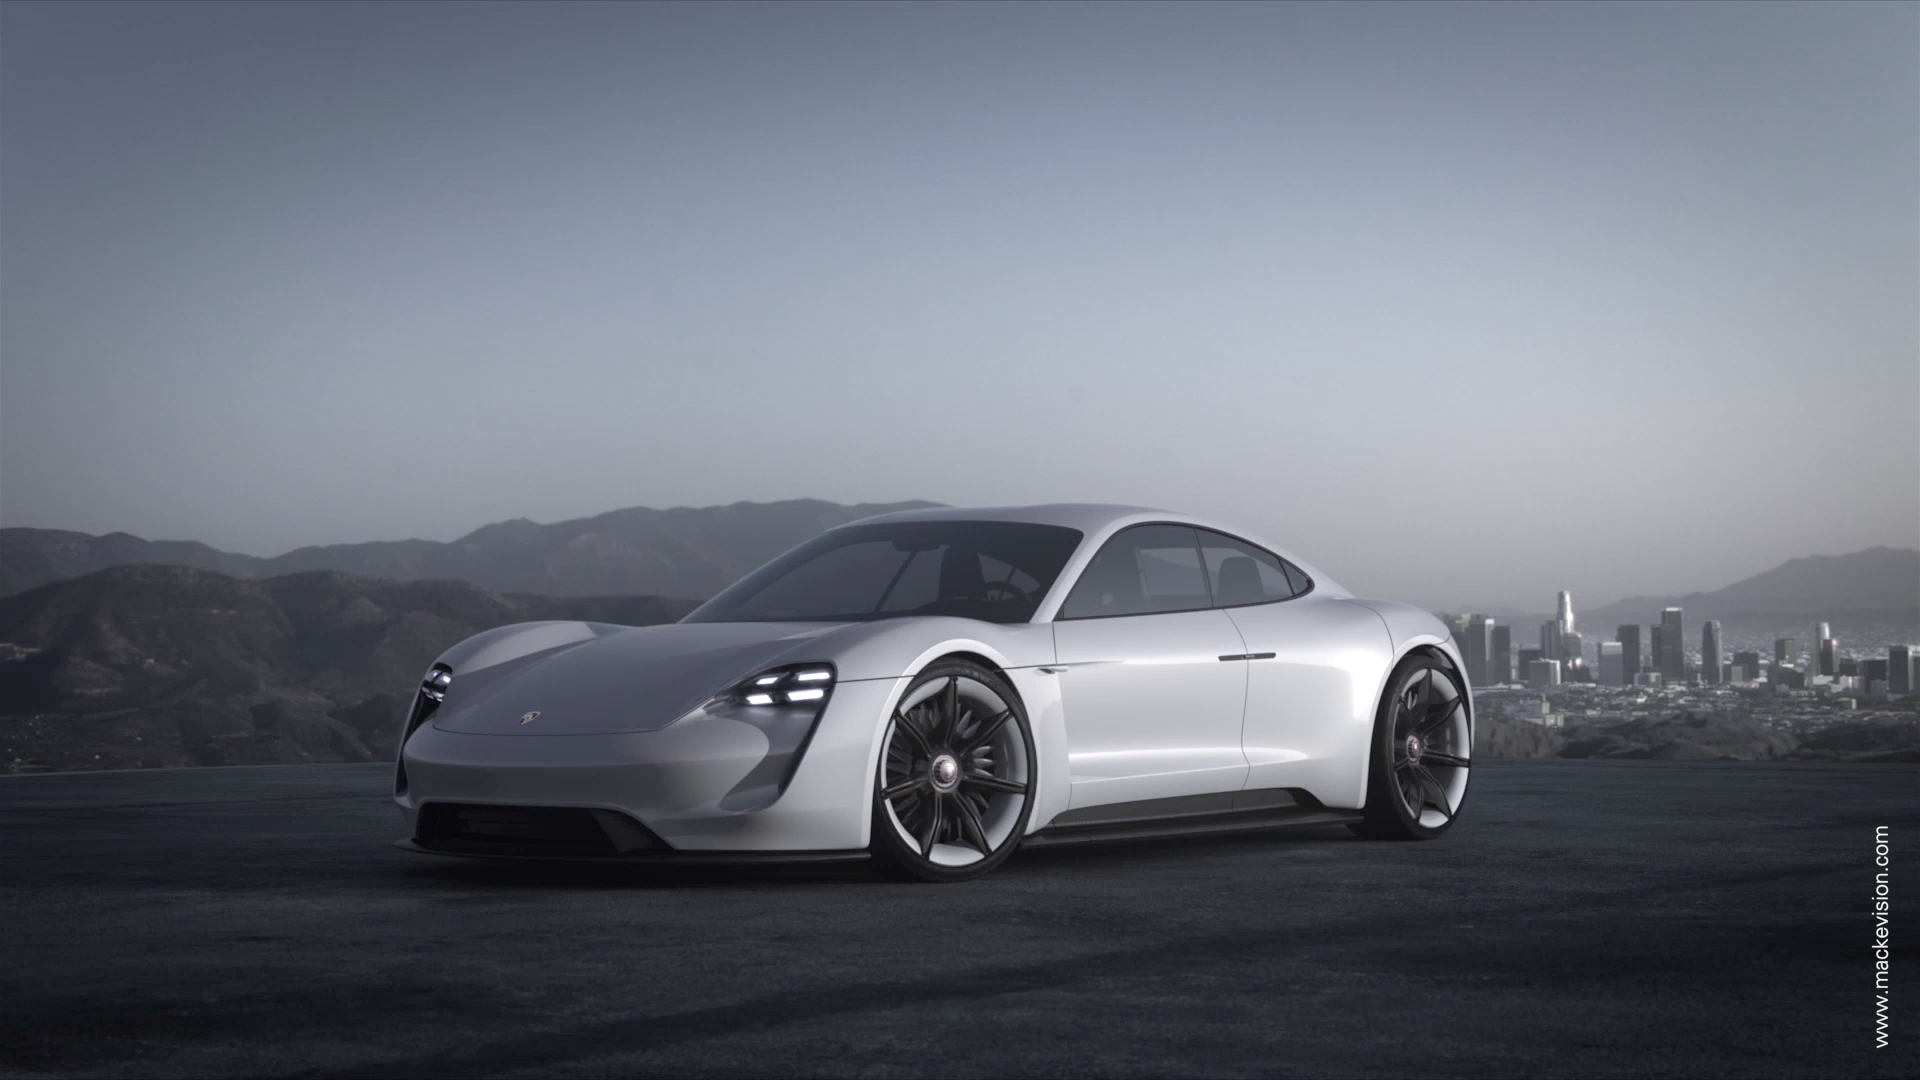 CGI gives us the first glimpse inside Porsche’s electric Mission E